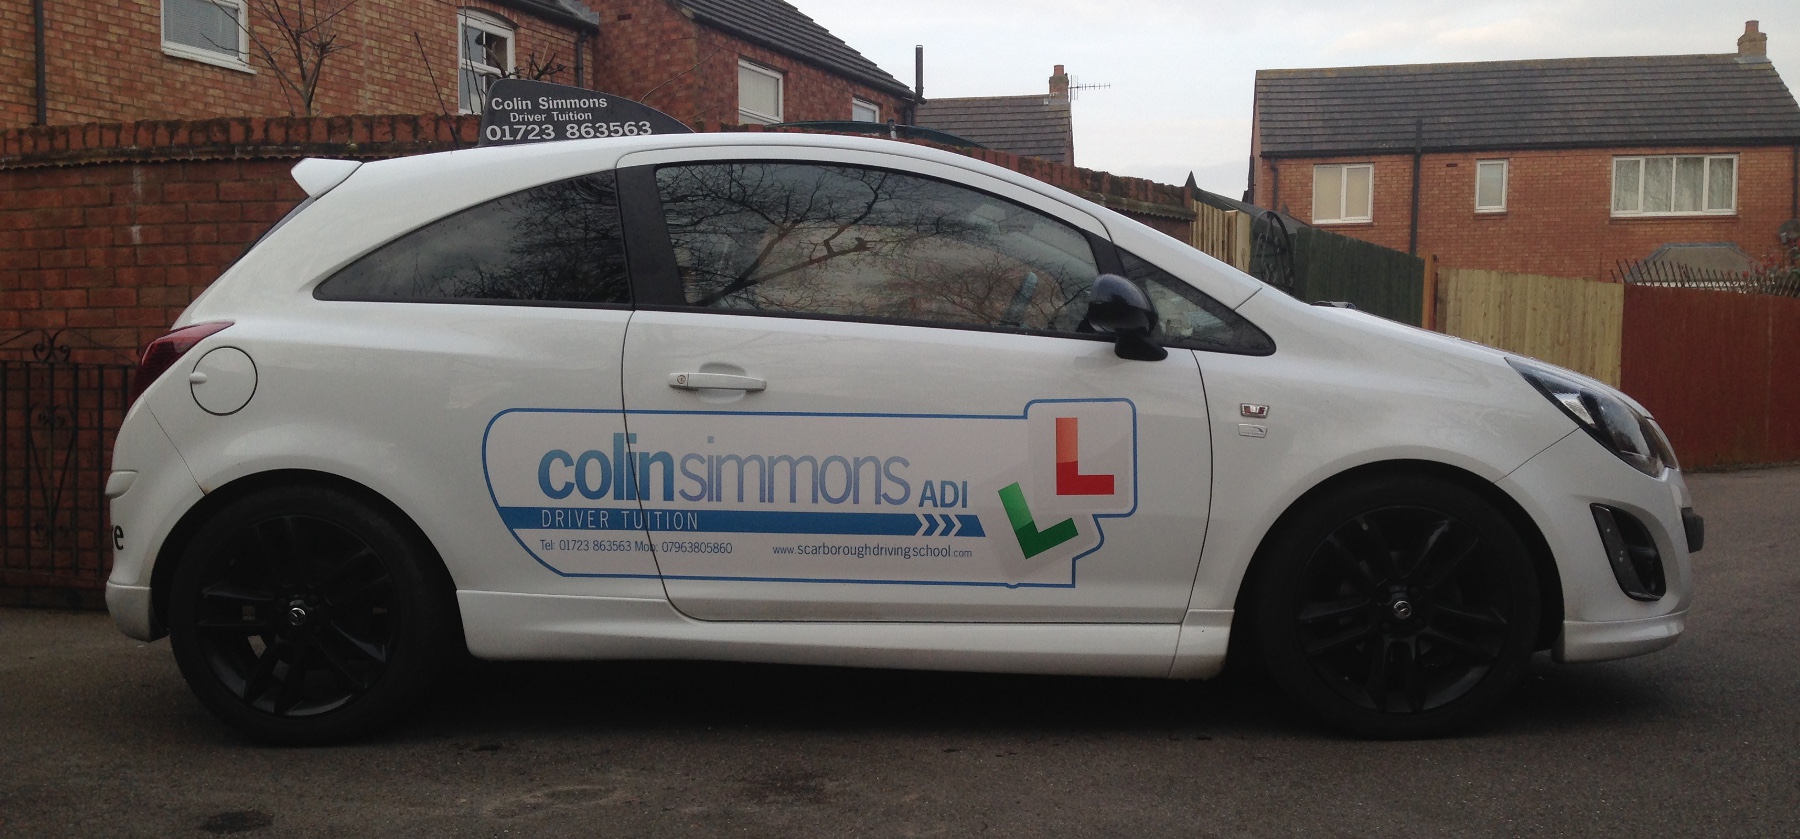 Colin Simmons Driver Tuition in Scarborough